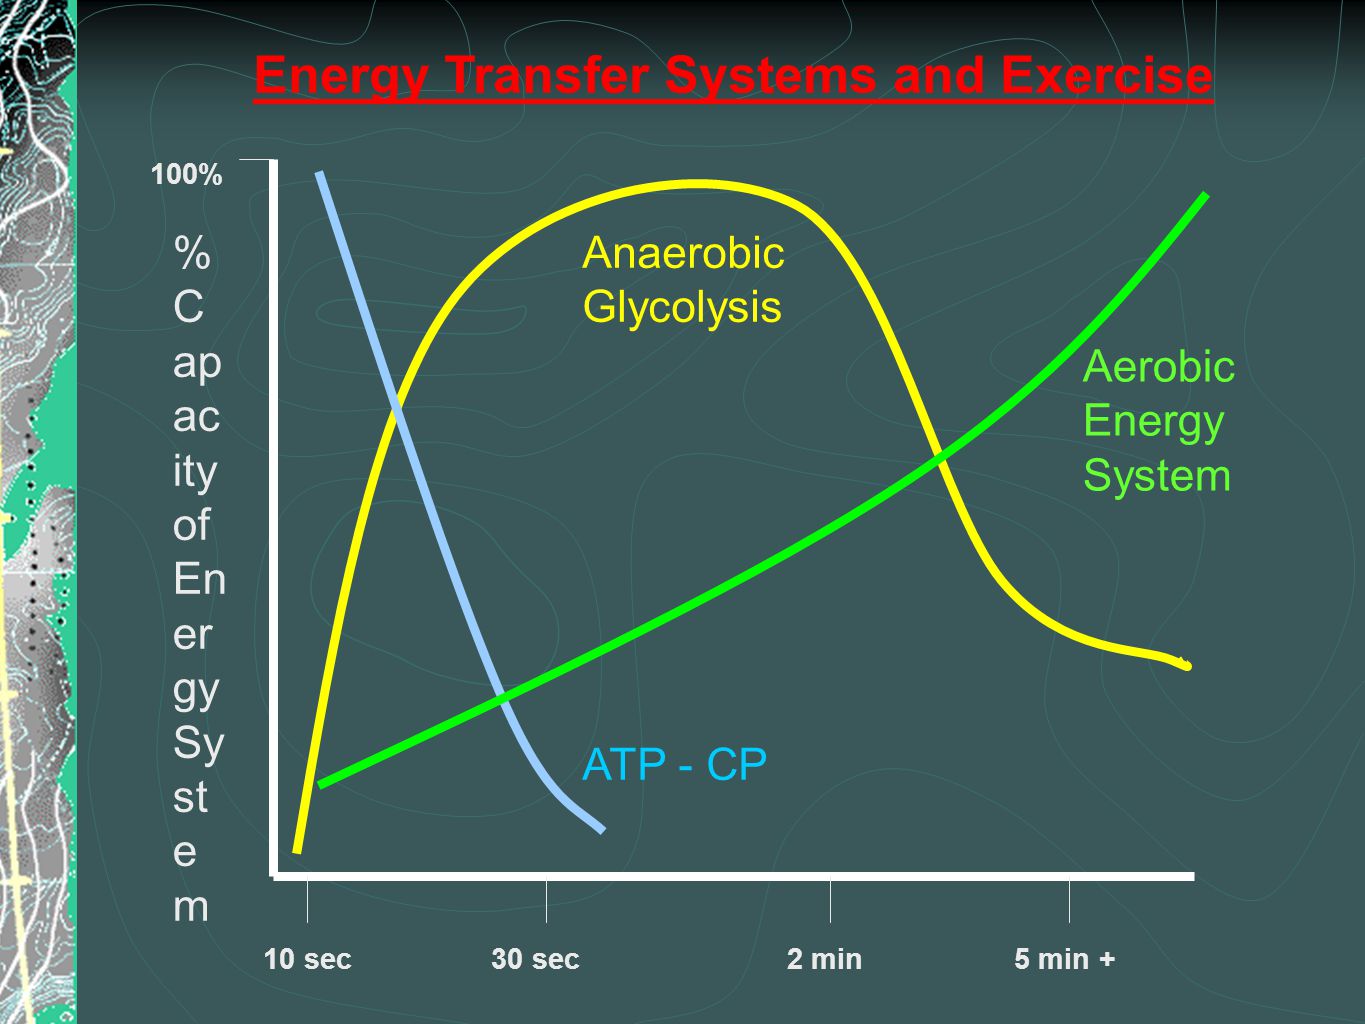 100% % C ap ac ity of En er gy Sy st e m 10 sec30 sec2 min5 min + Energy Transfer Systems and Exercise Aerobic Energy System Anaerobic Glycolysis ATP - CP